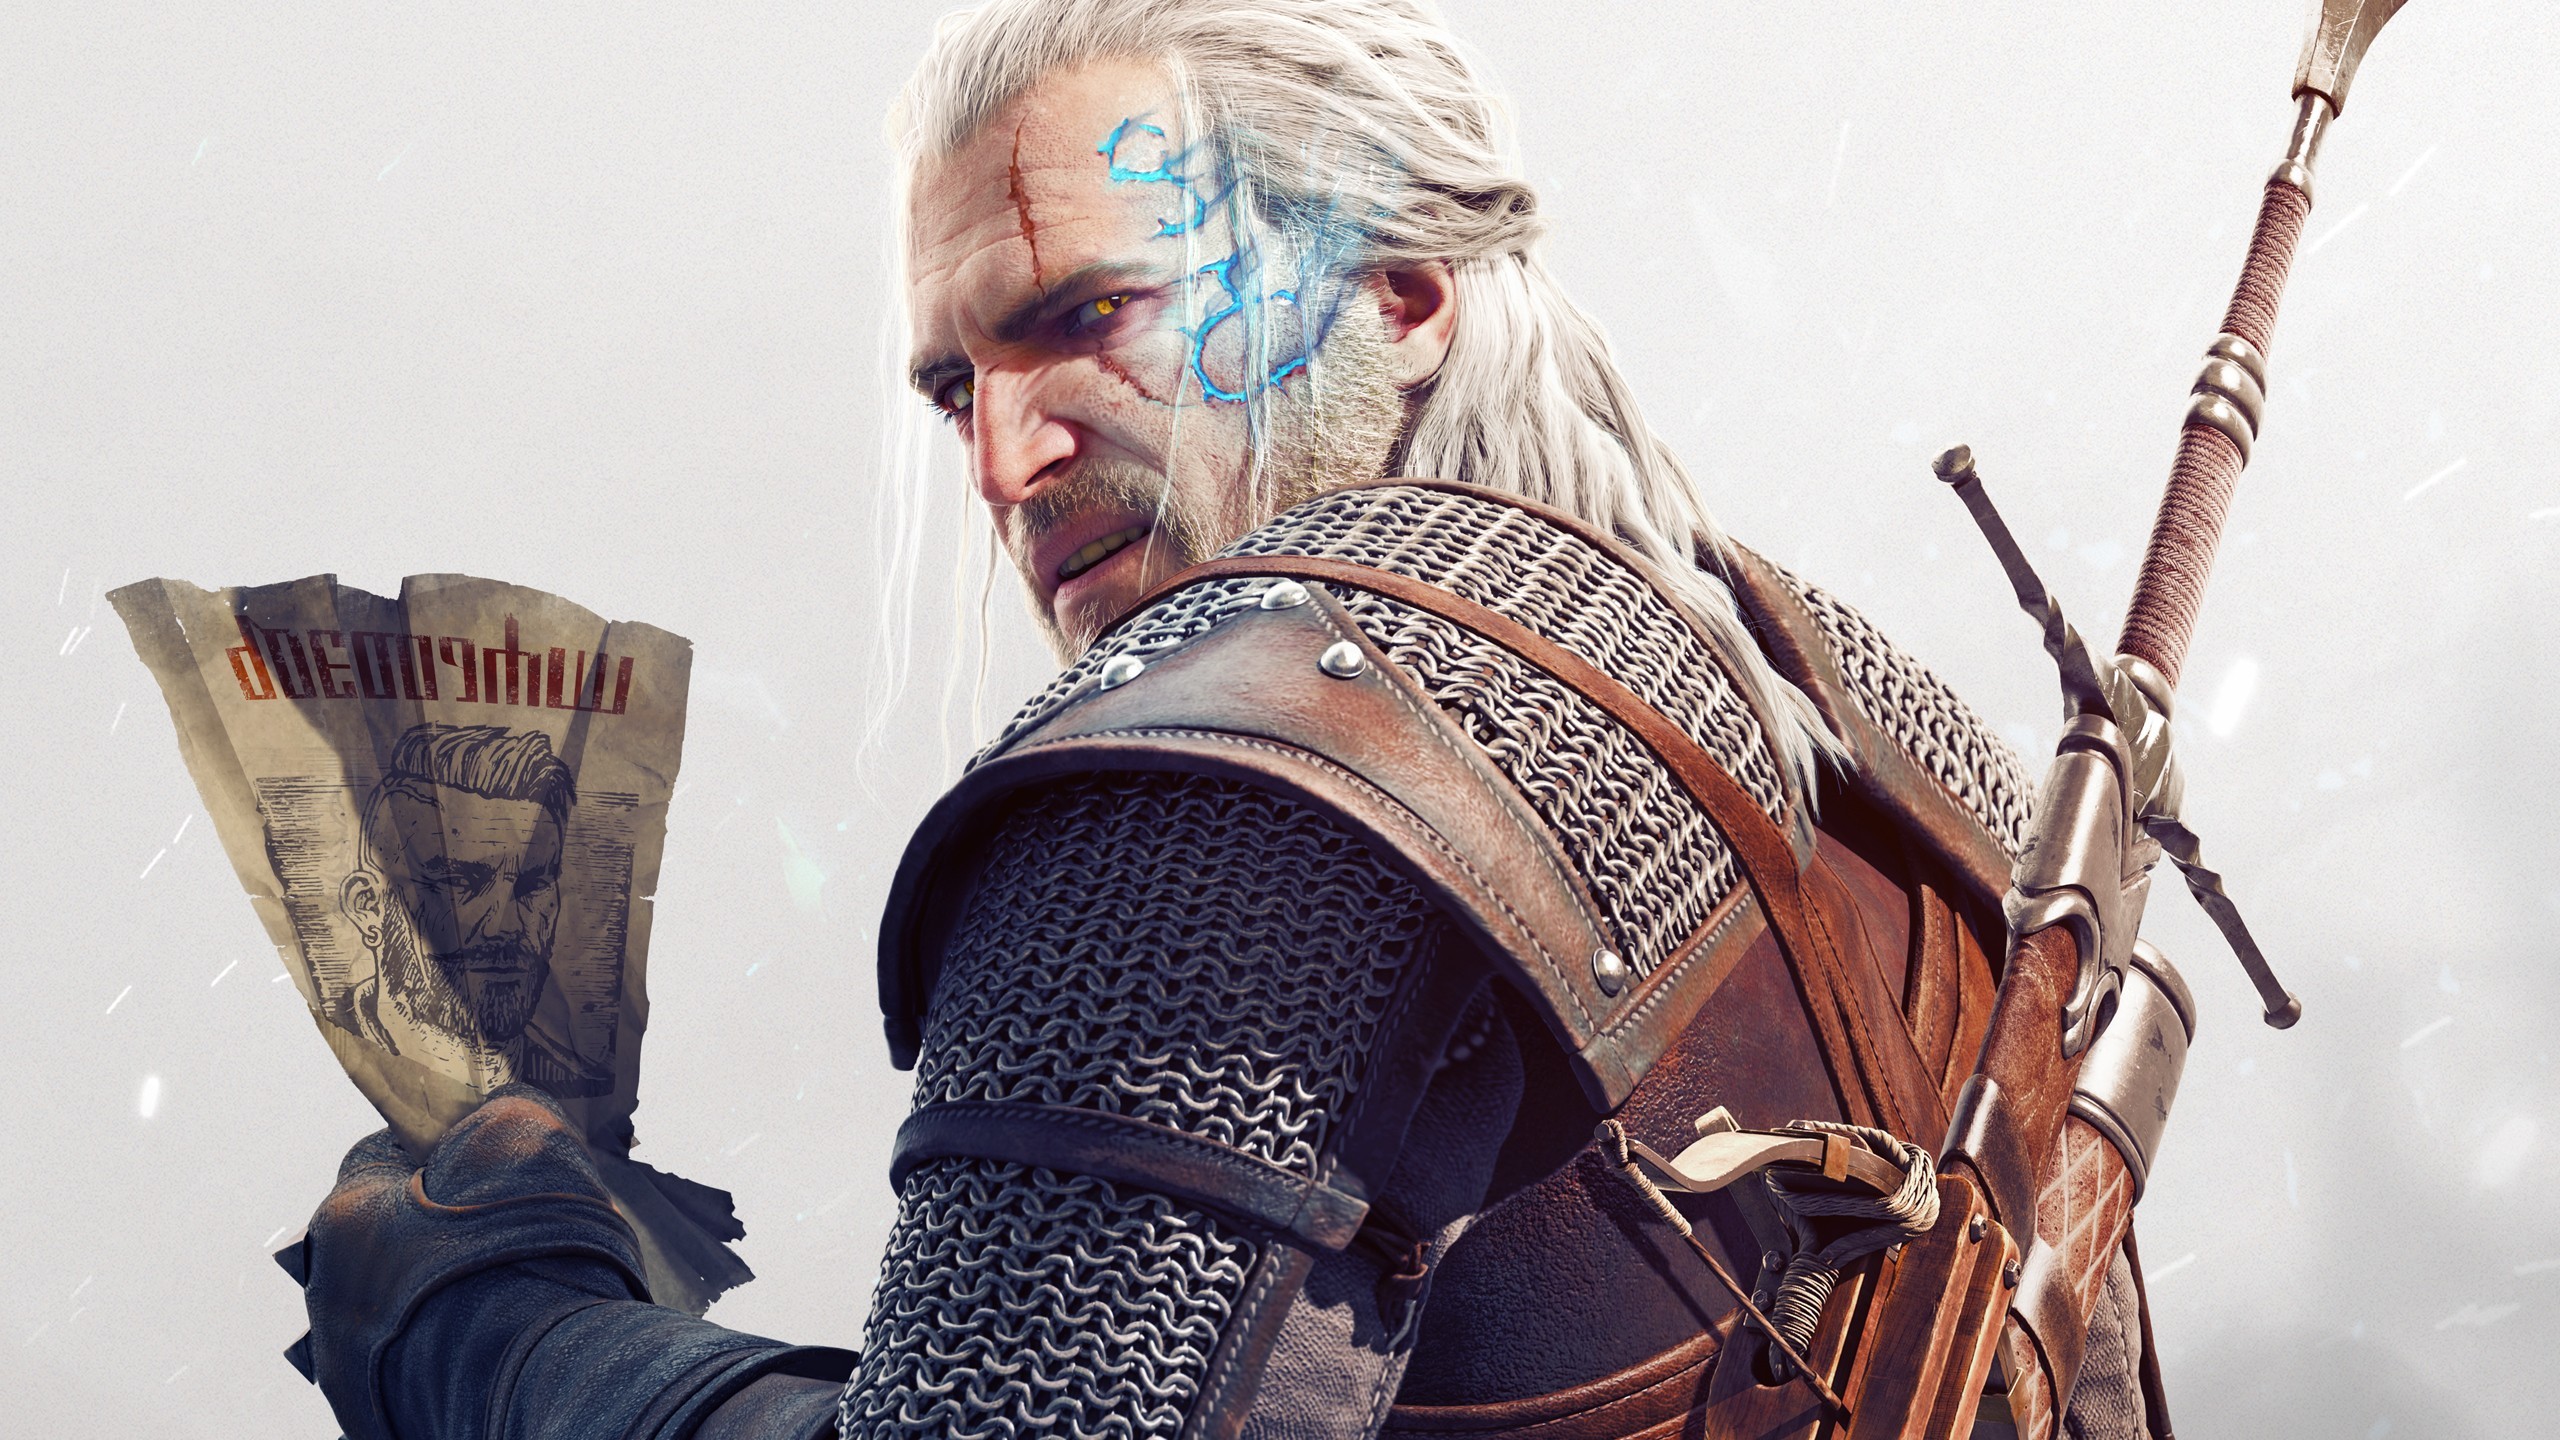 the_witcher_3_hearts_of_stone_geralt-2560x1440.jpg